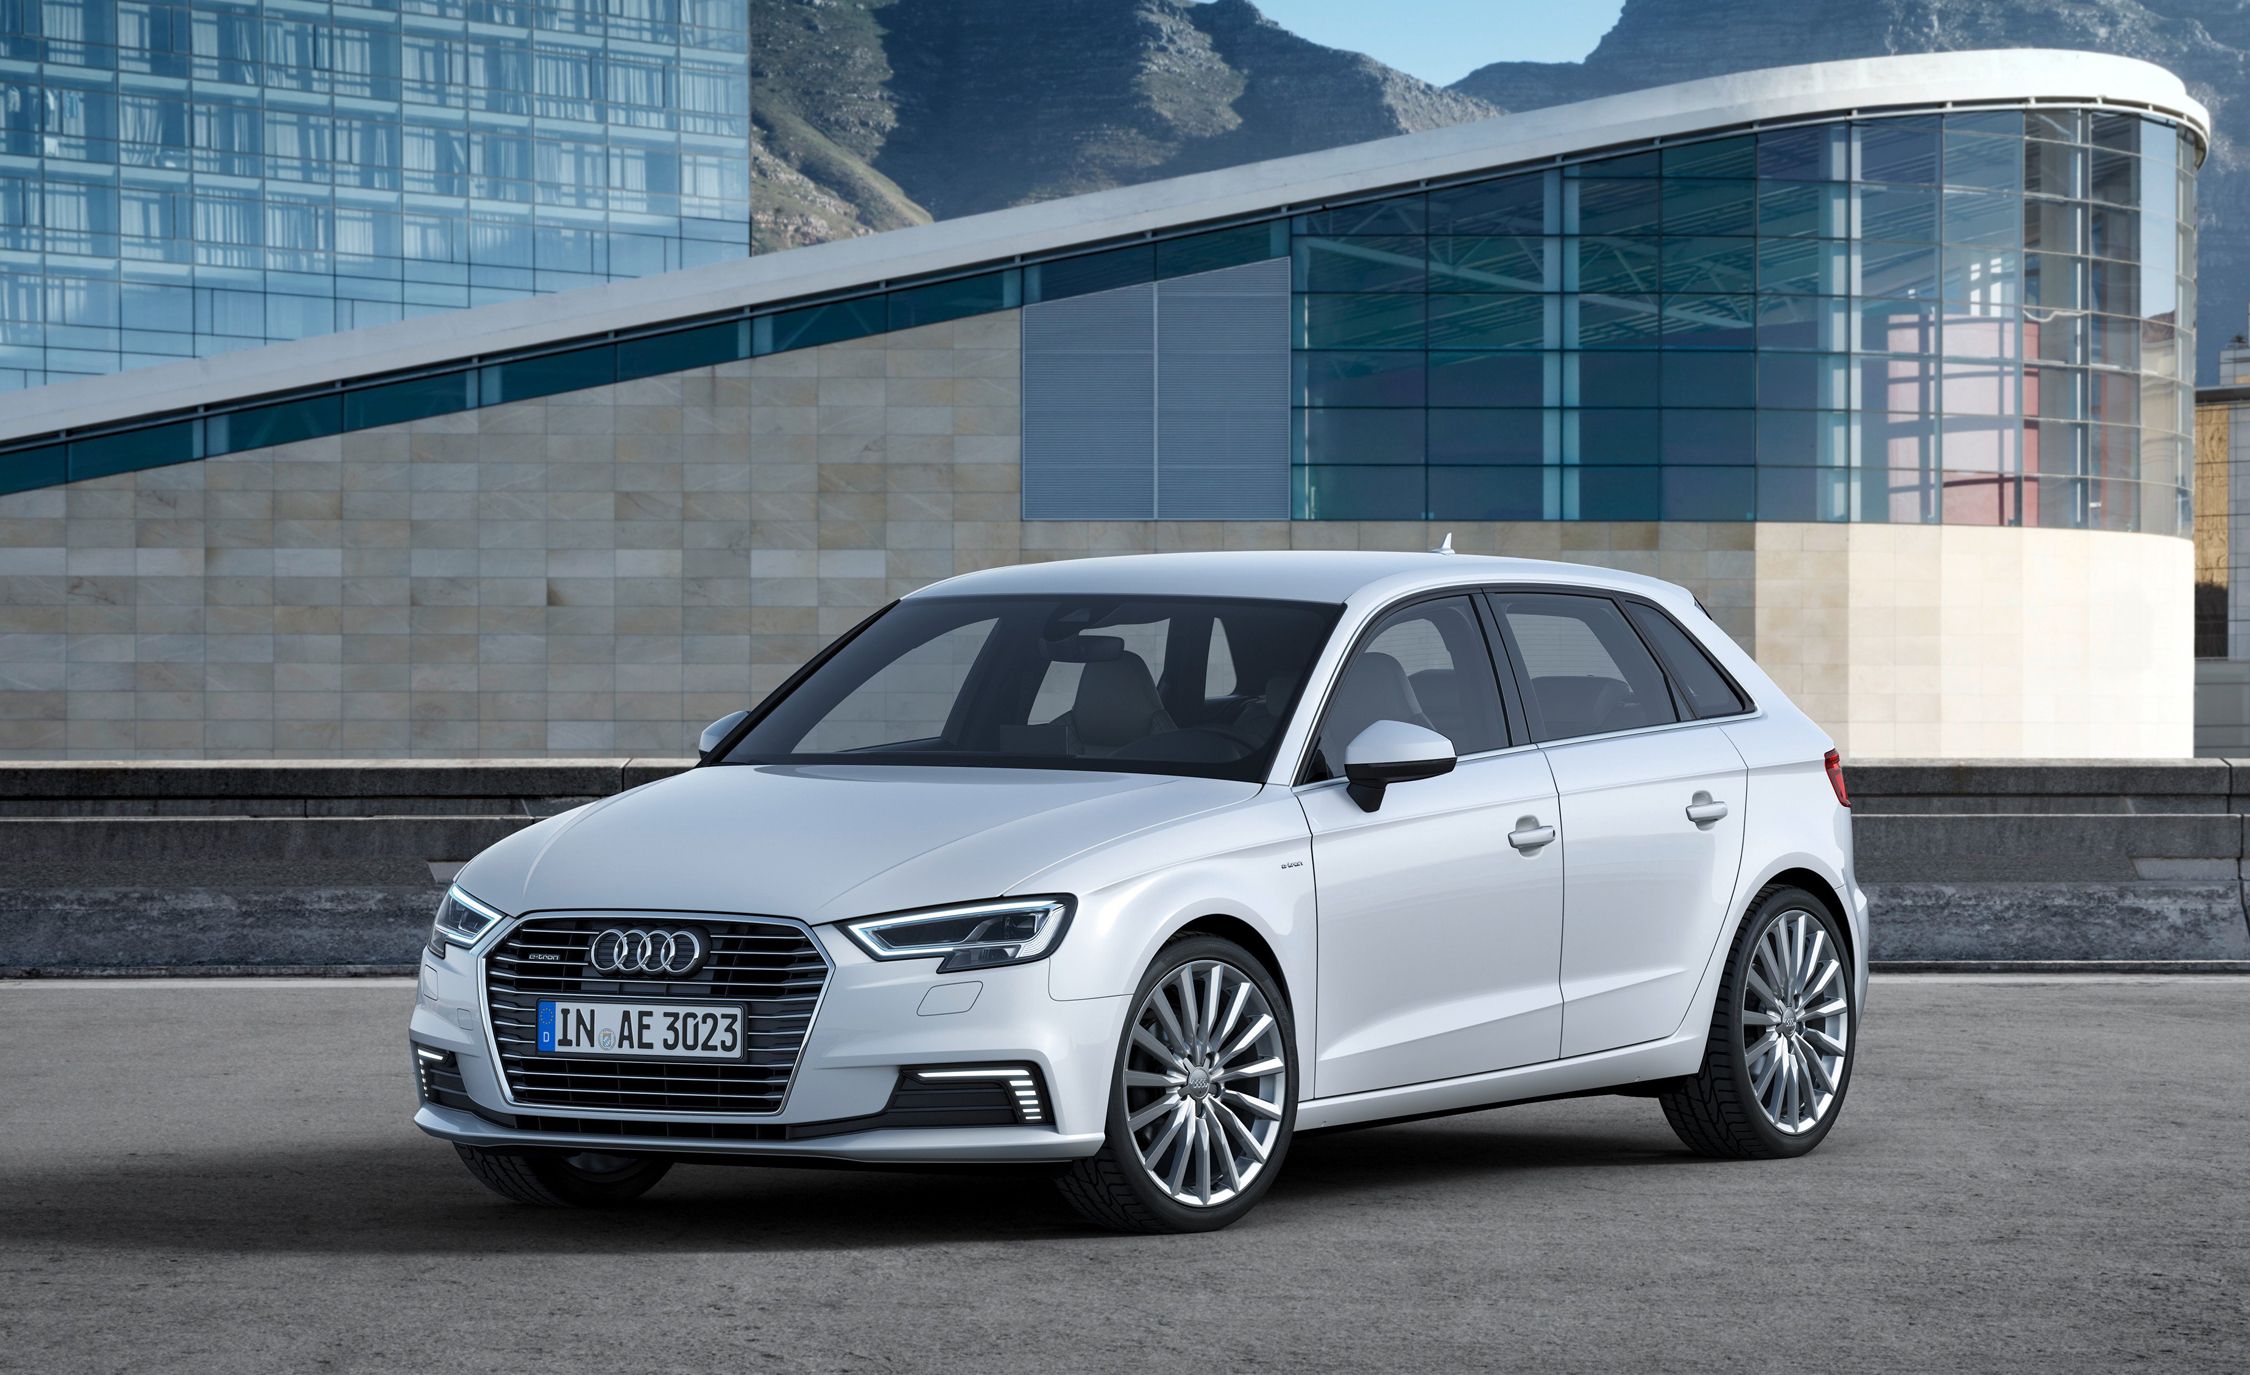 2017 Audi Sportback e-tron Review, Pricing, and Specs